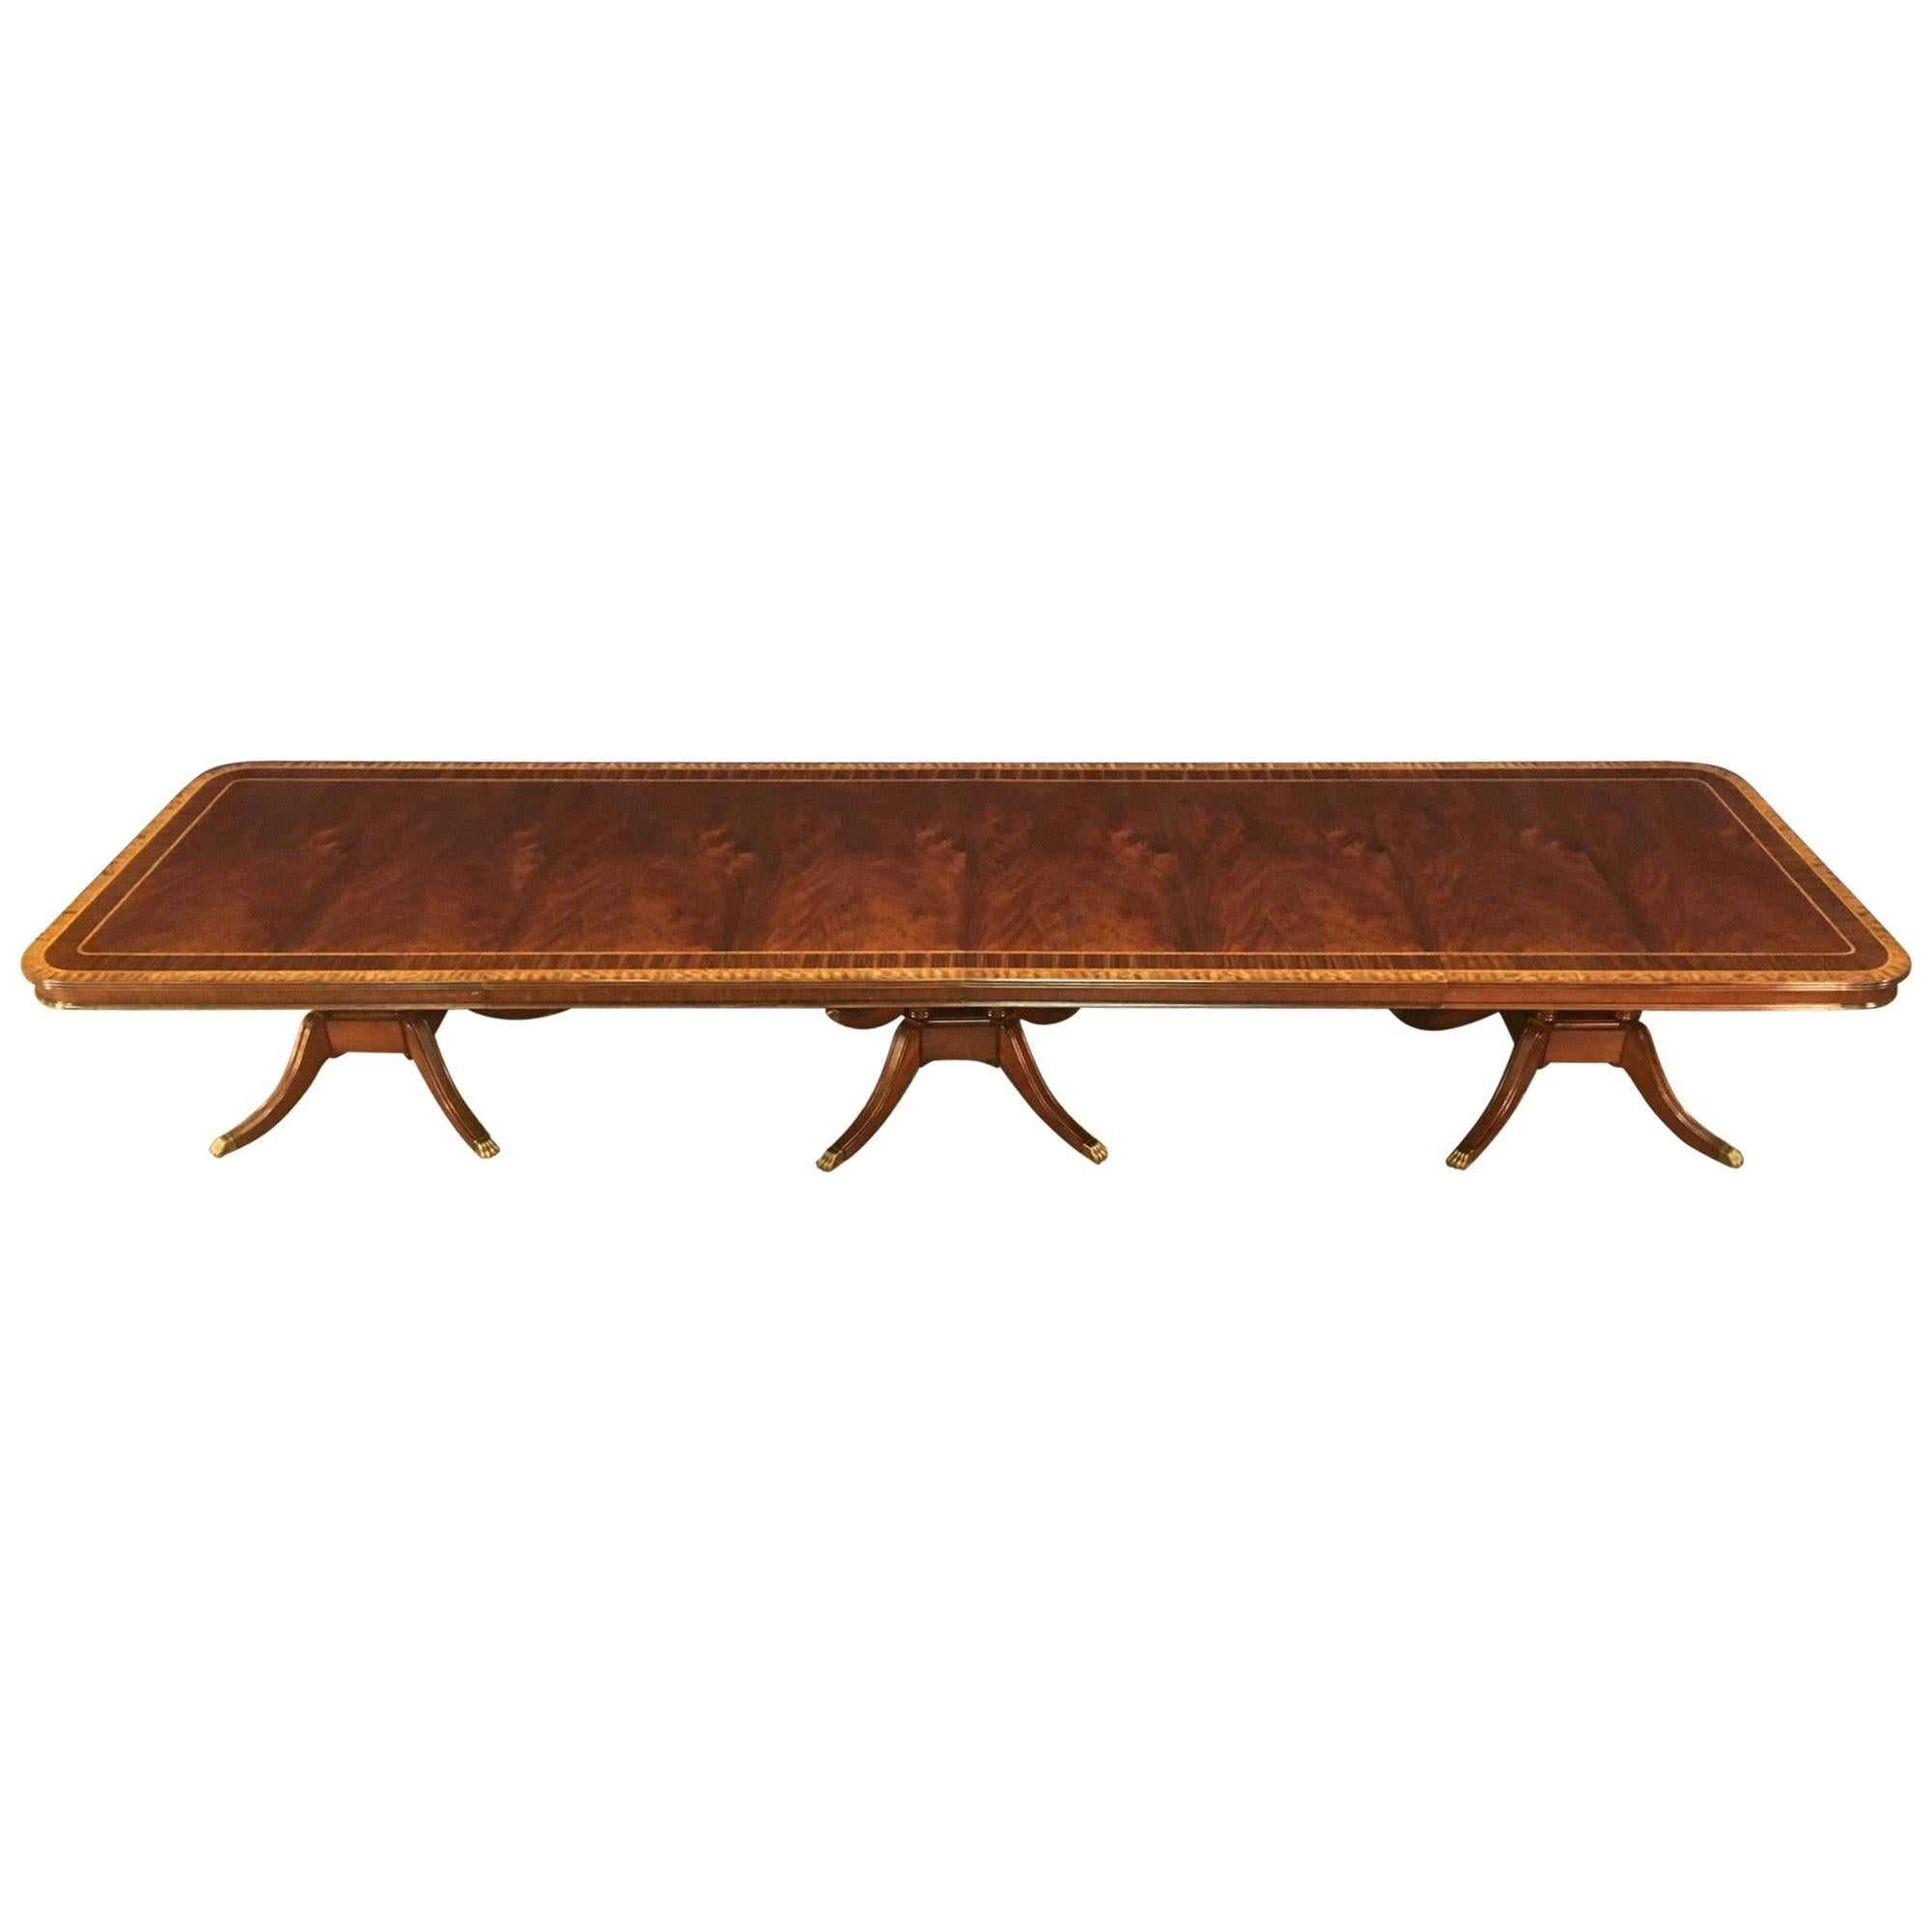 Custom Large 16 ft. Mahogany Banquet Dining Table by Leighton Hall